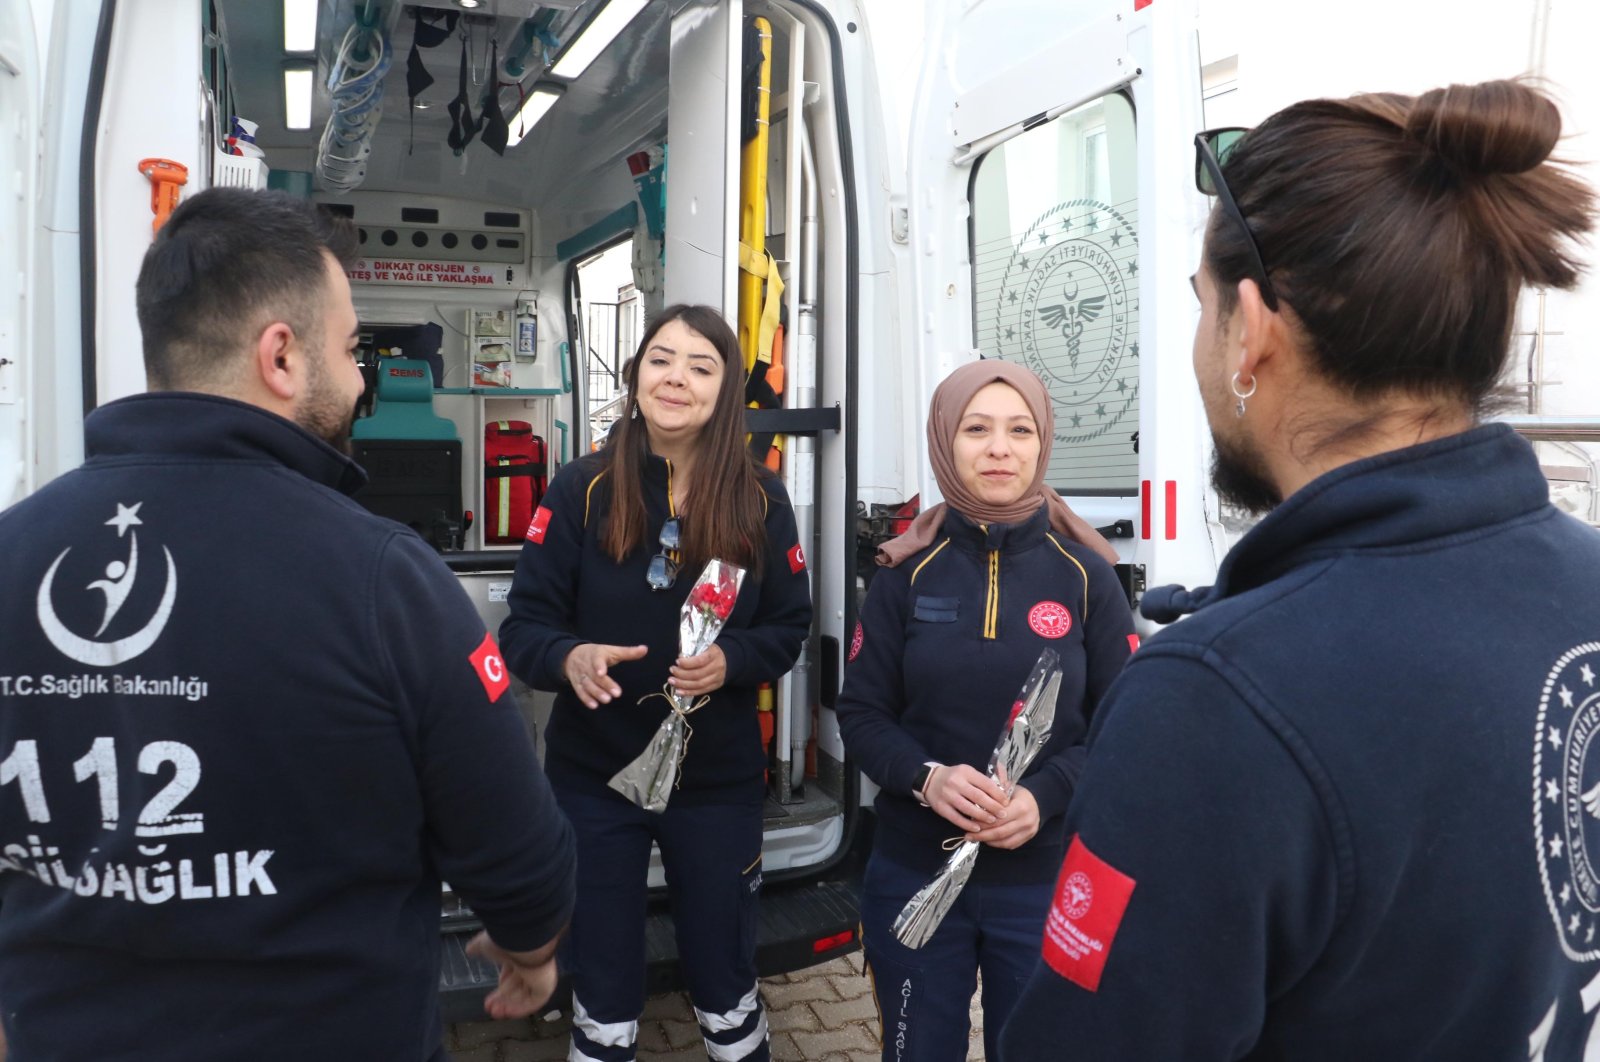 Female health workers at Eskişehir 112 Provincial Ambulance Service were given roses on Women&#039;s Day, March 8, 2023. (DHA Photo)